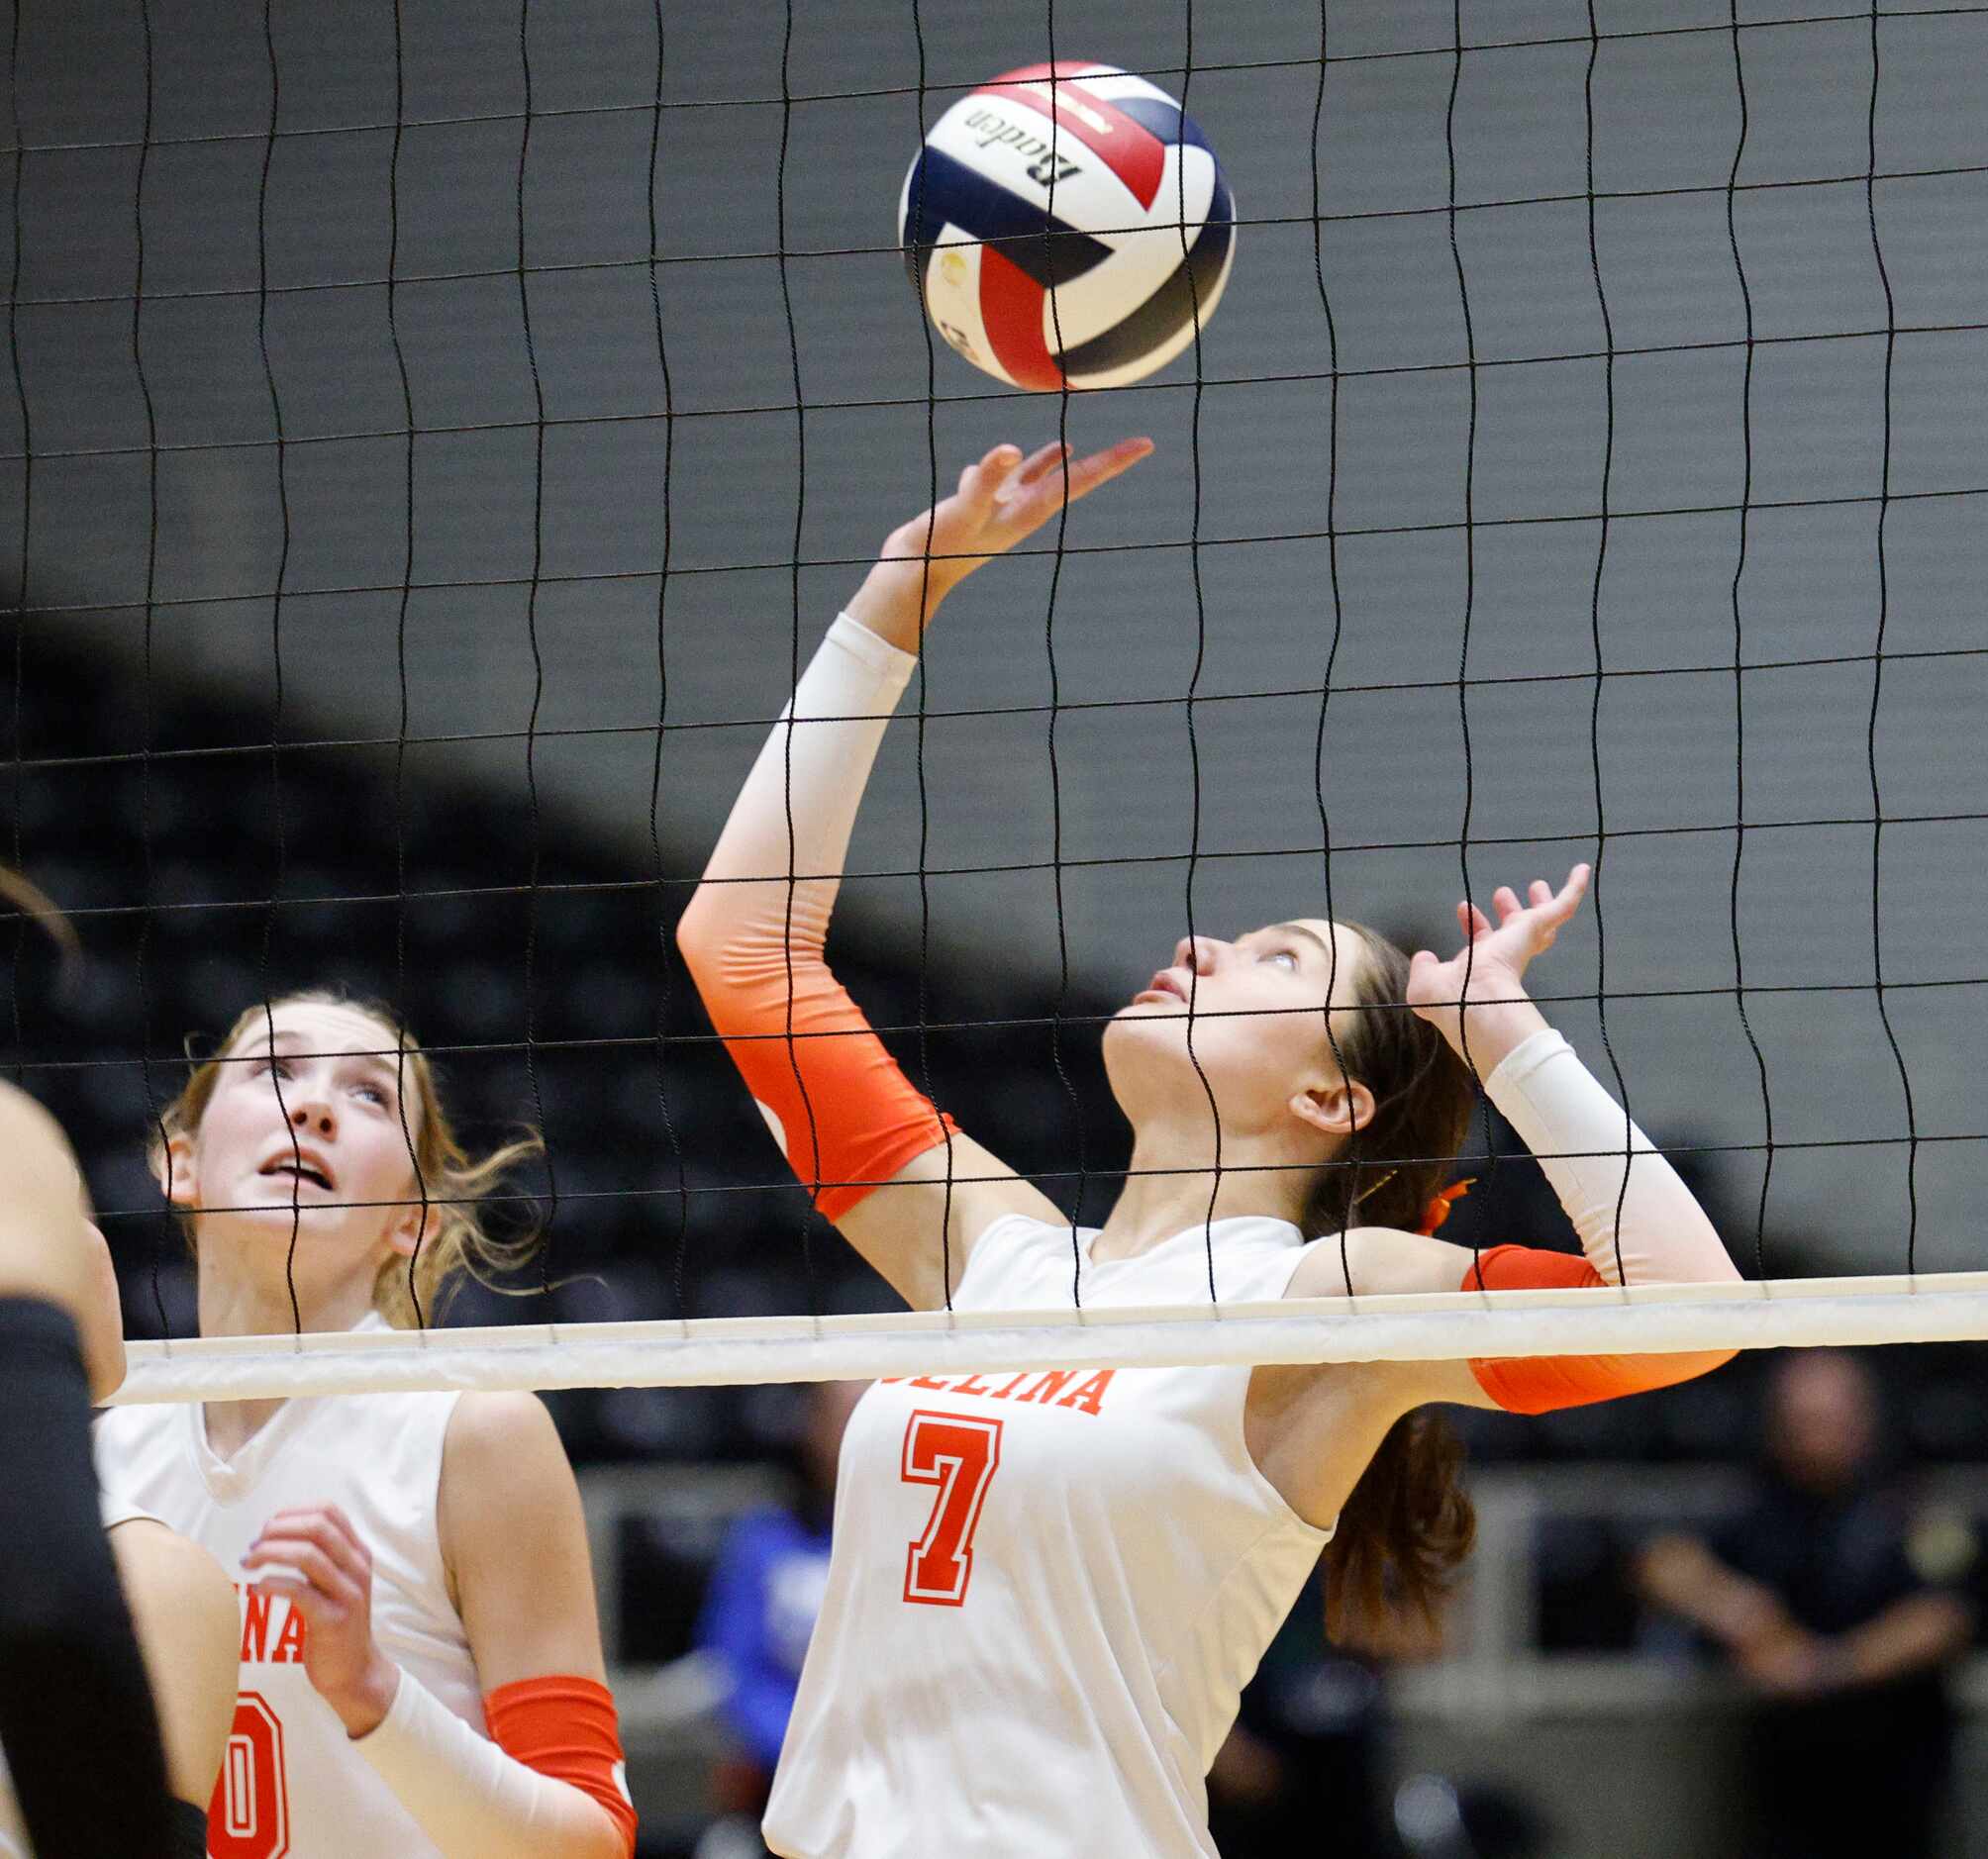 Celina's Ryan McCoy (7) tries for a save as Celina's Ashley Woodrum (10) looks on during a...